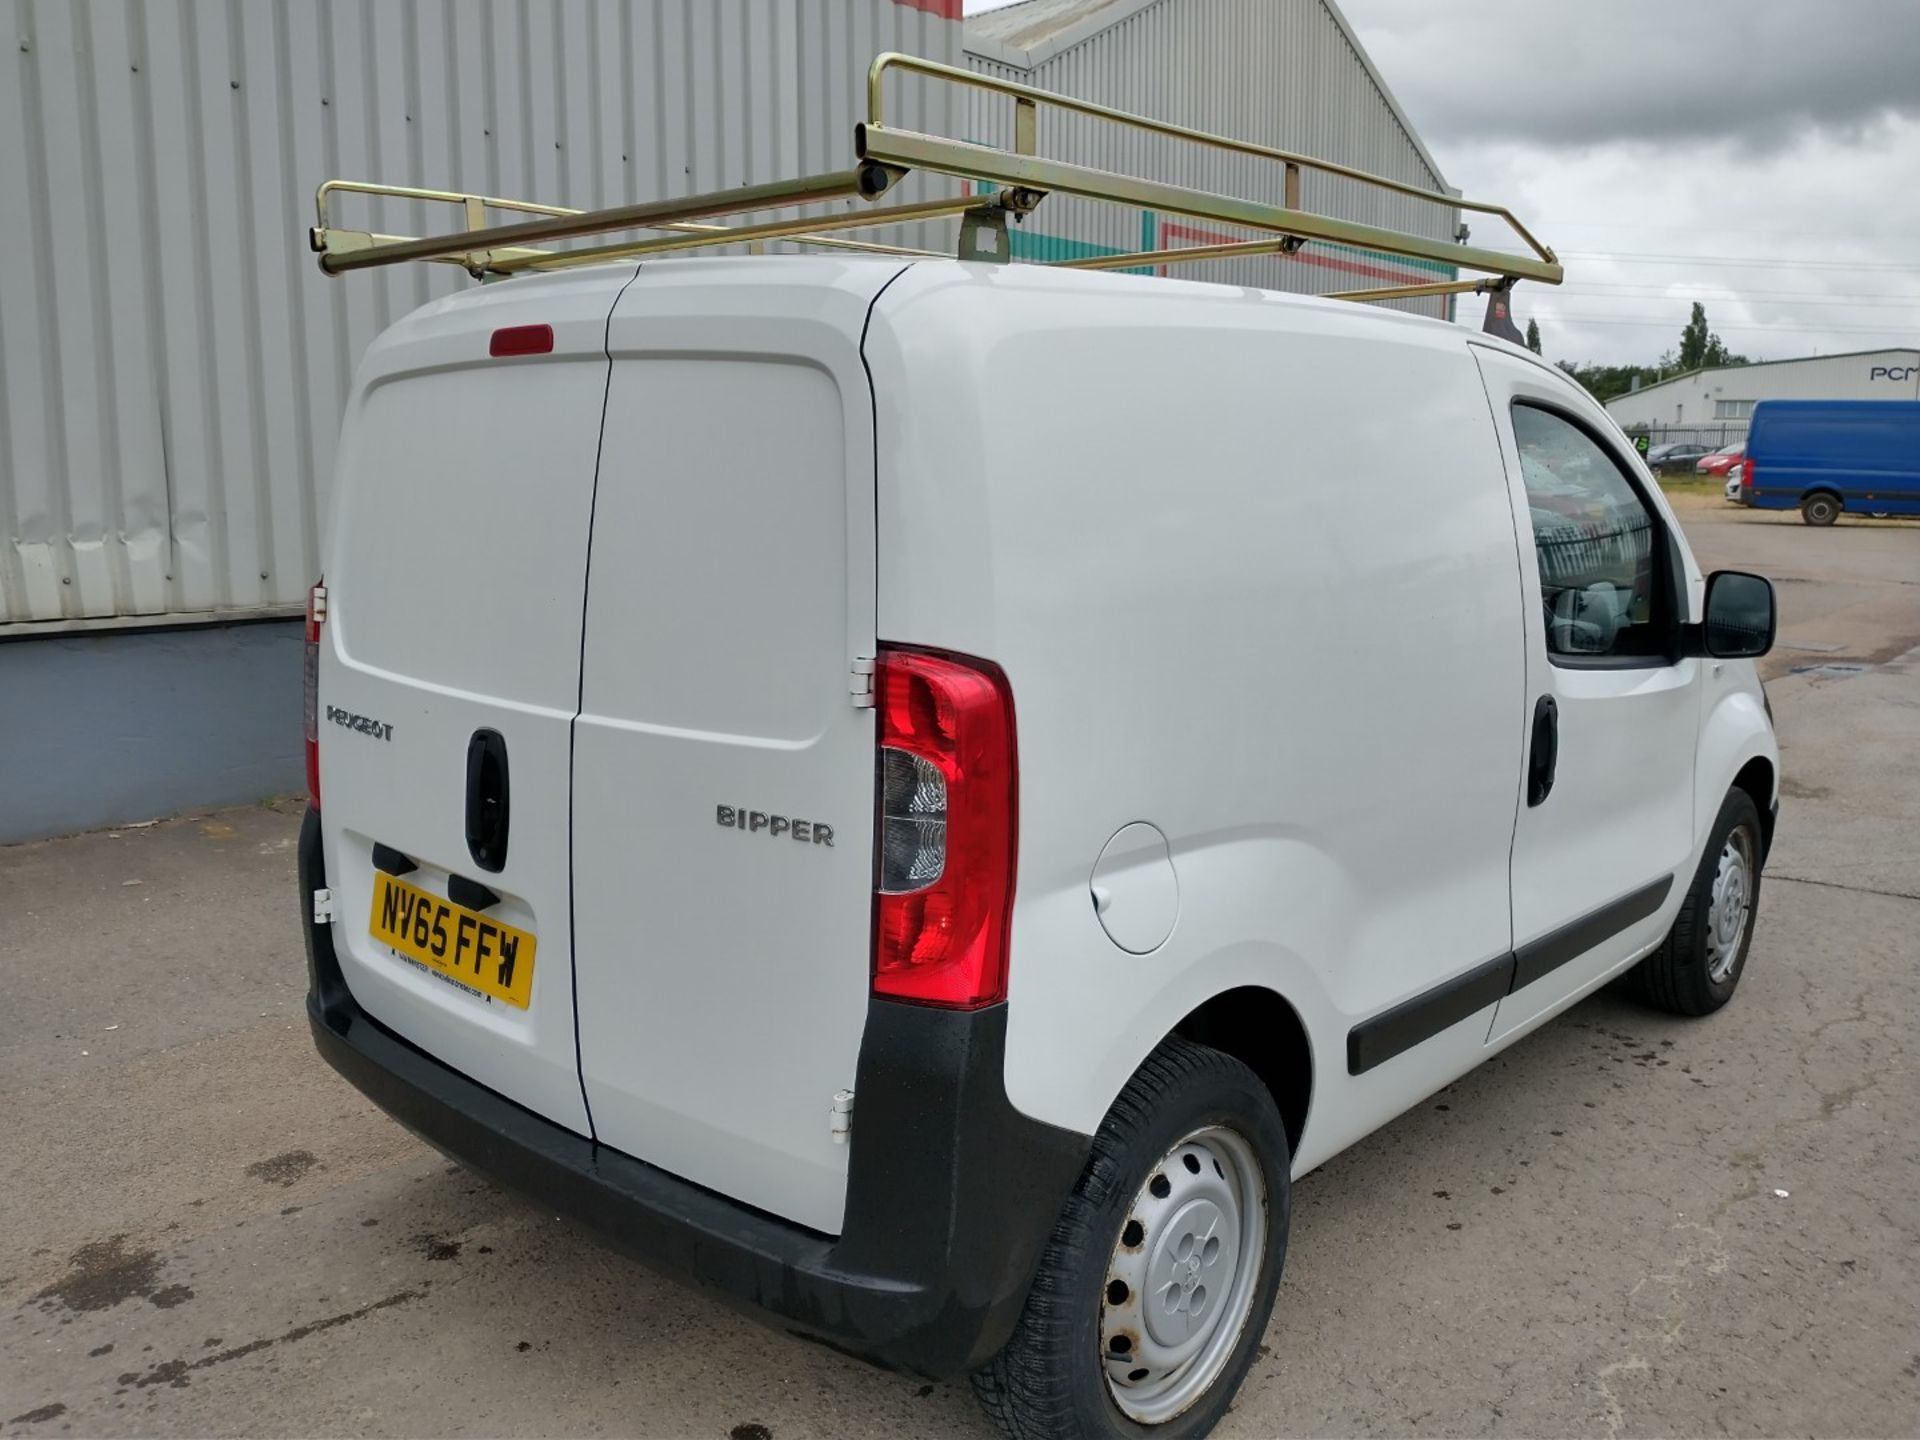 2015 Peugeot Bipper S Hdi White Panel - CL505 - Ref: VVS031 - Location: Corby, Northamptonshire106, - Image 4 of 16